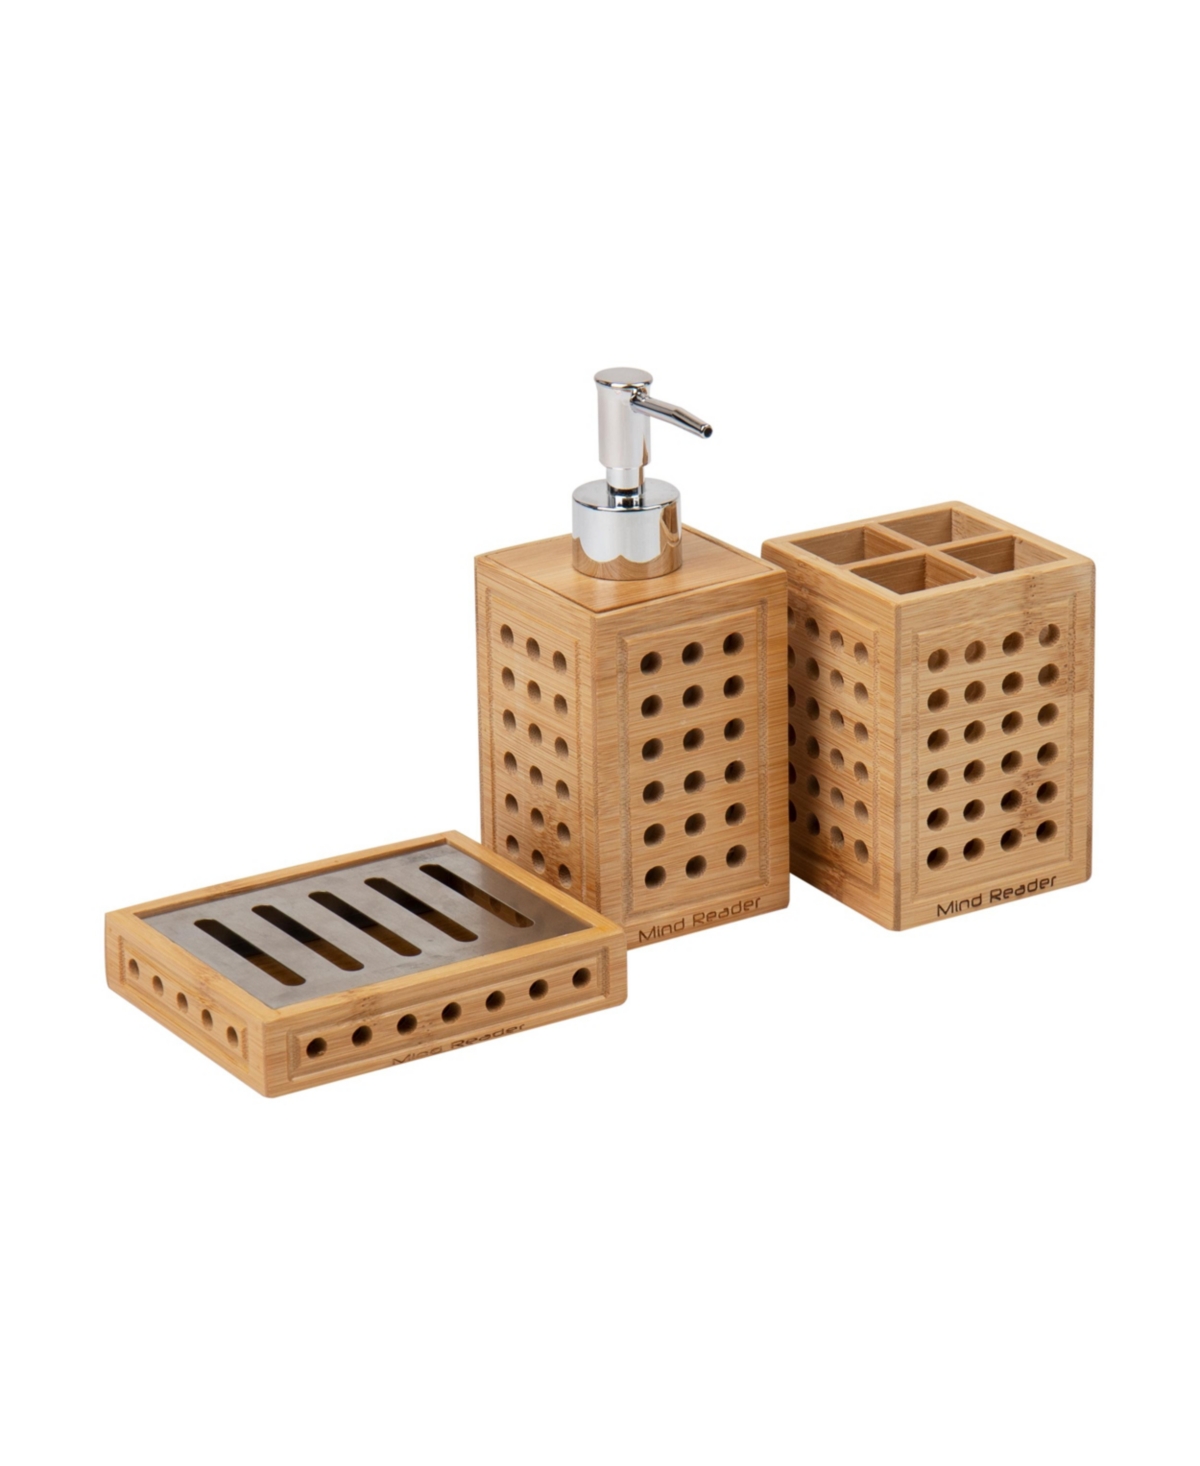 Mind Reader Lattice Collection, Soap Dish, Liquid Soap Dispenser, And Toothbrush Holder Set, Bathroom, Rayon Fro In Brown